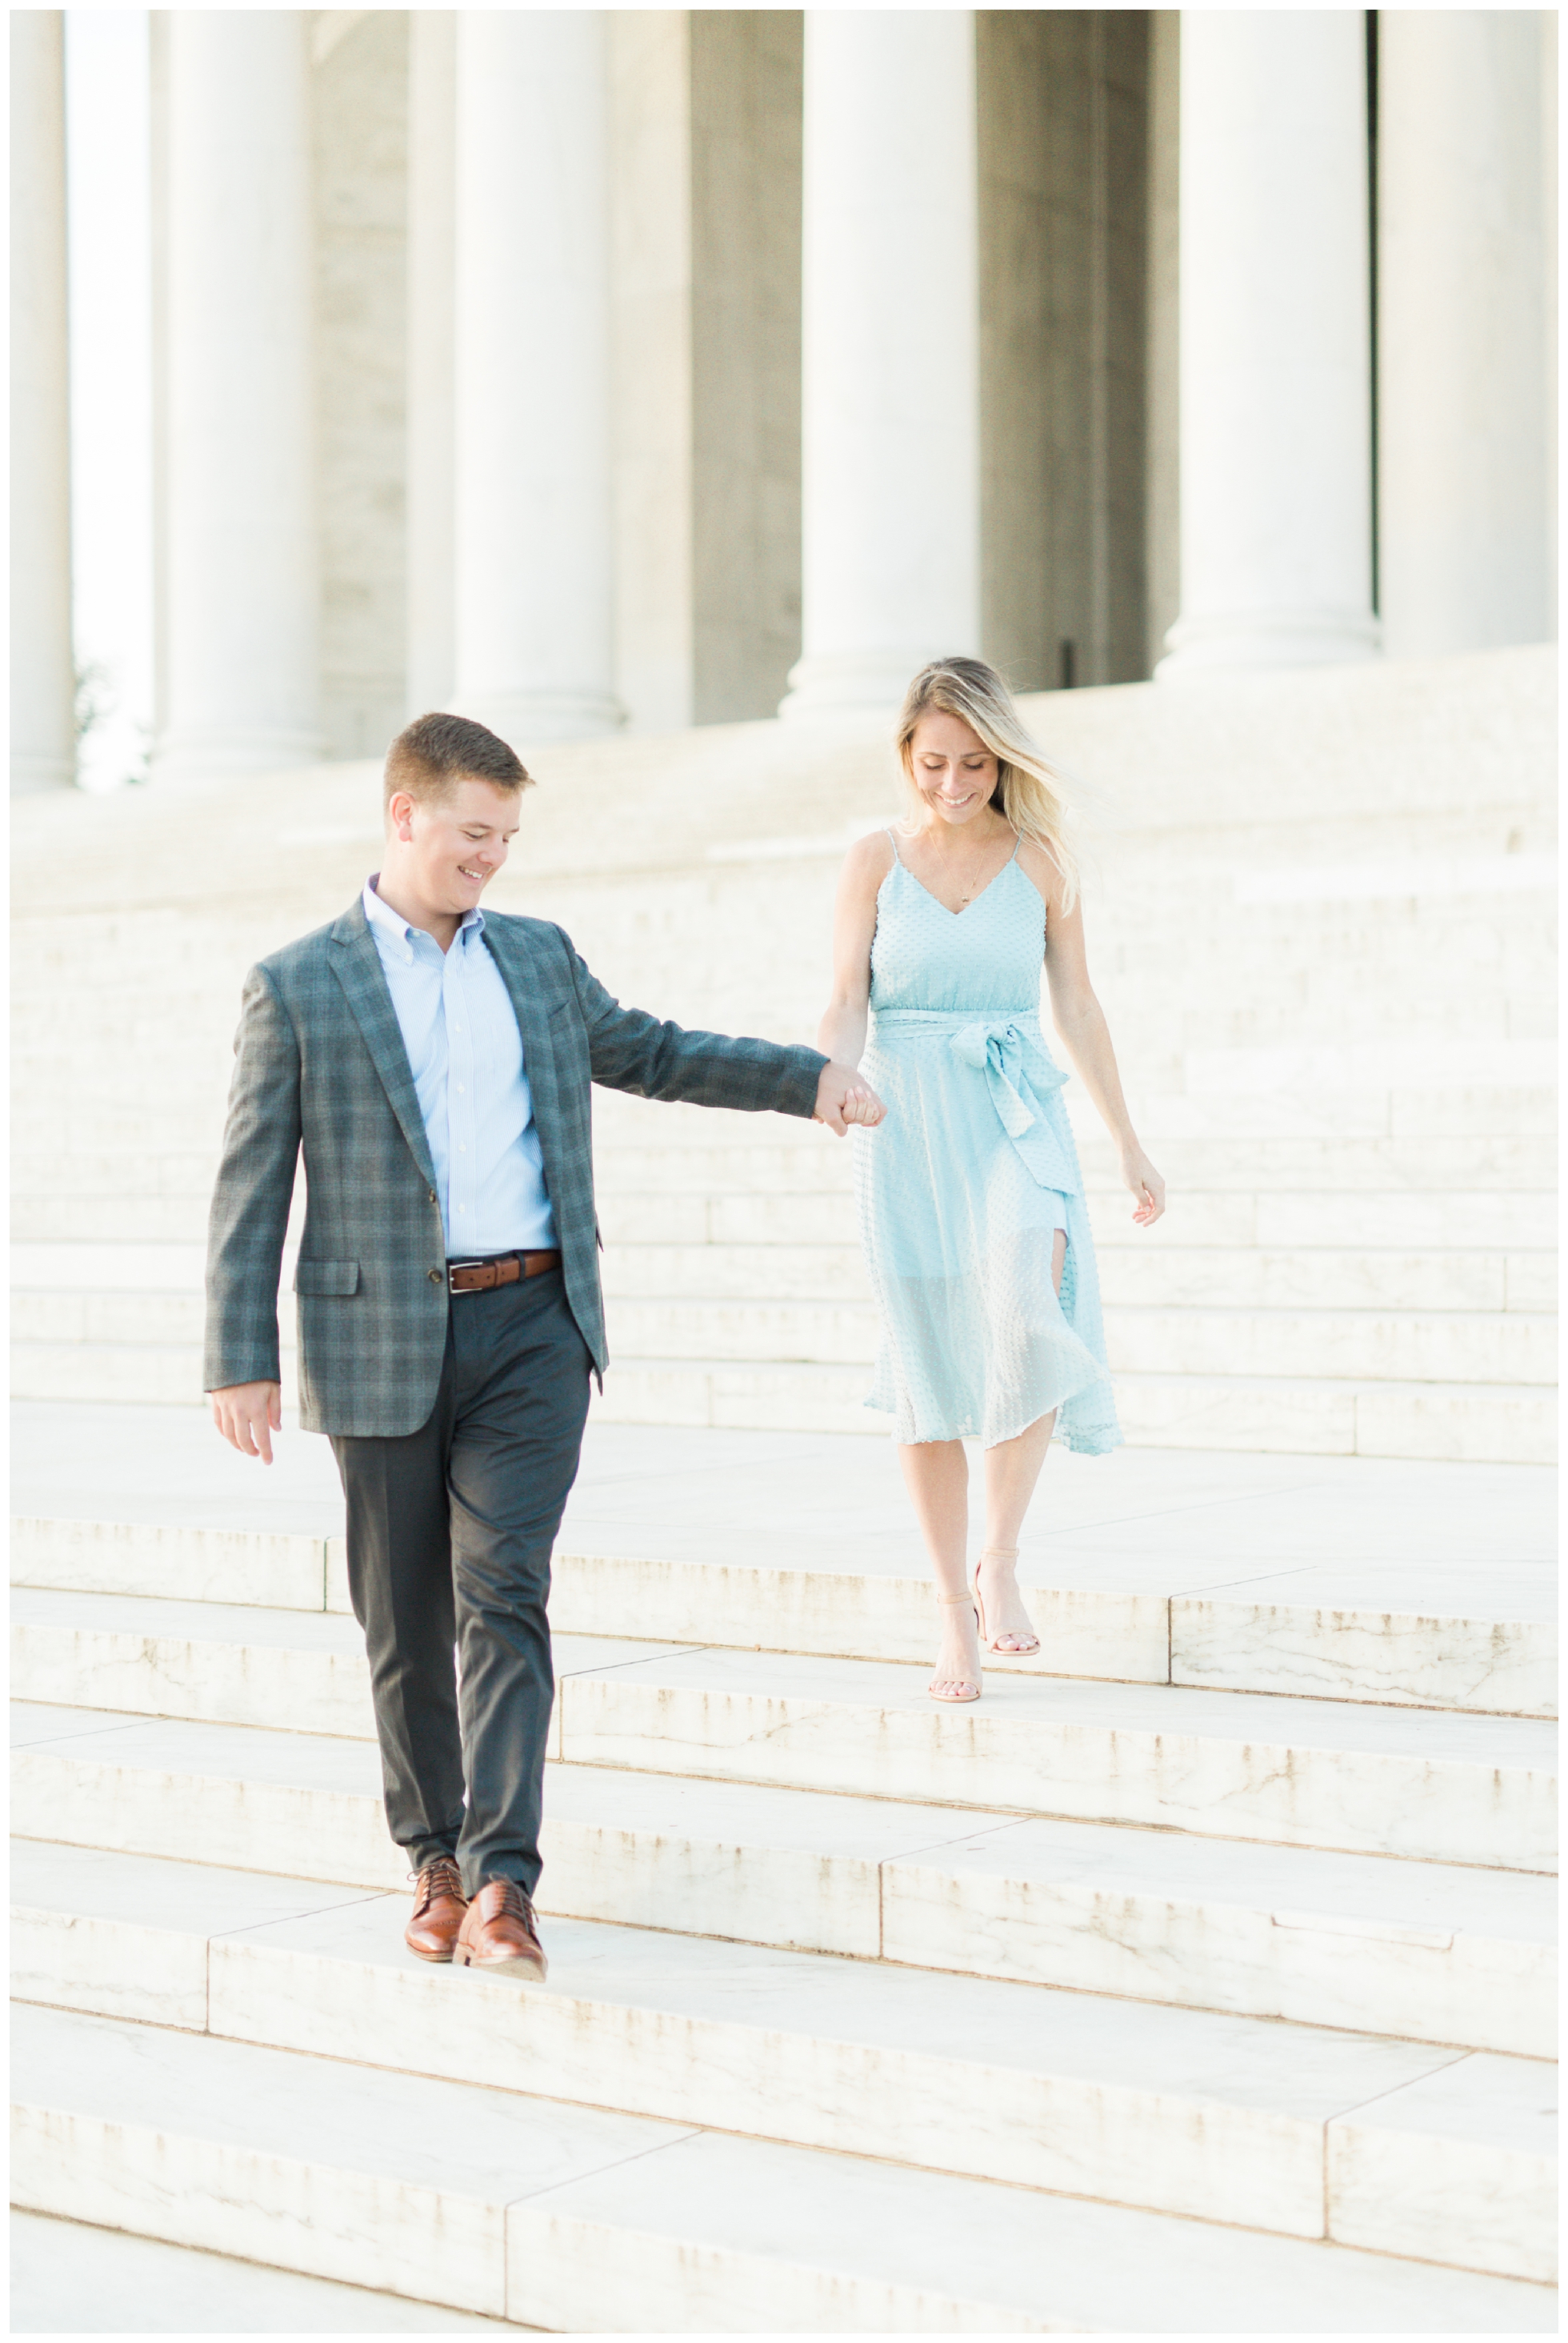 AnEngagement Session at the Jefferson Memorial